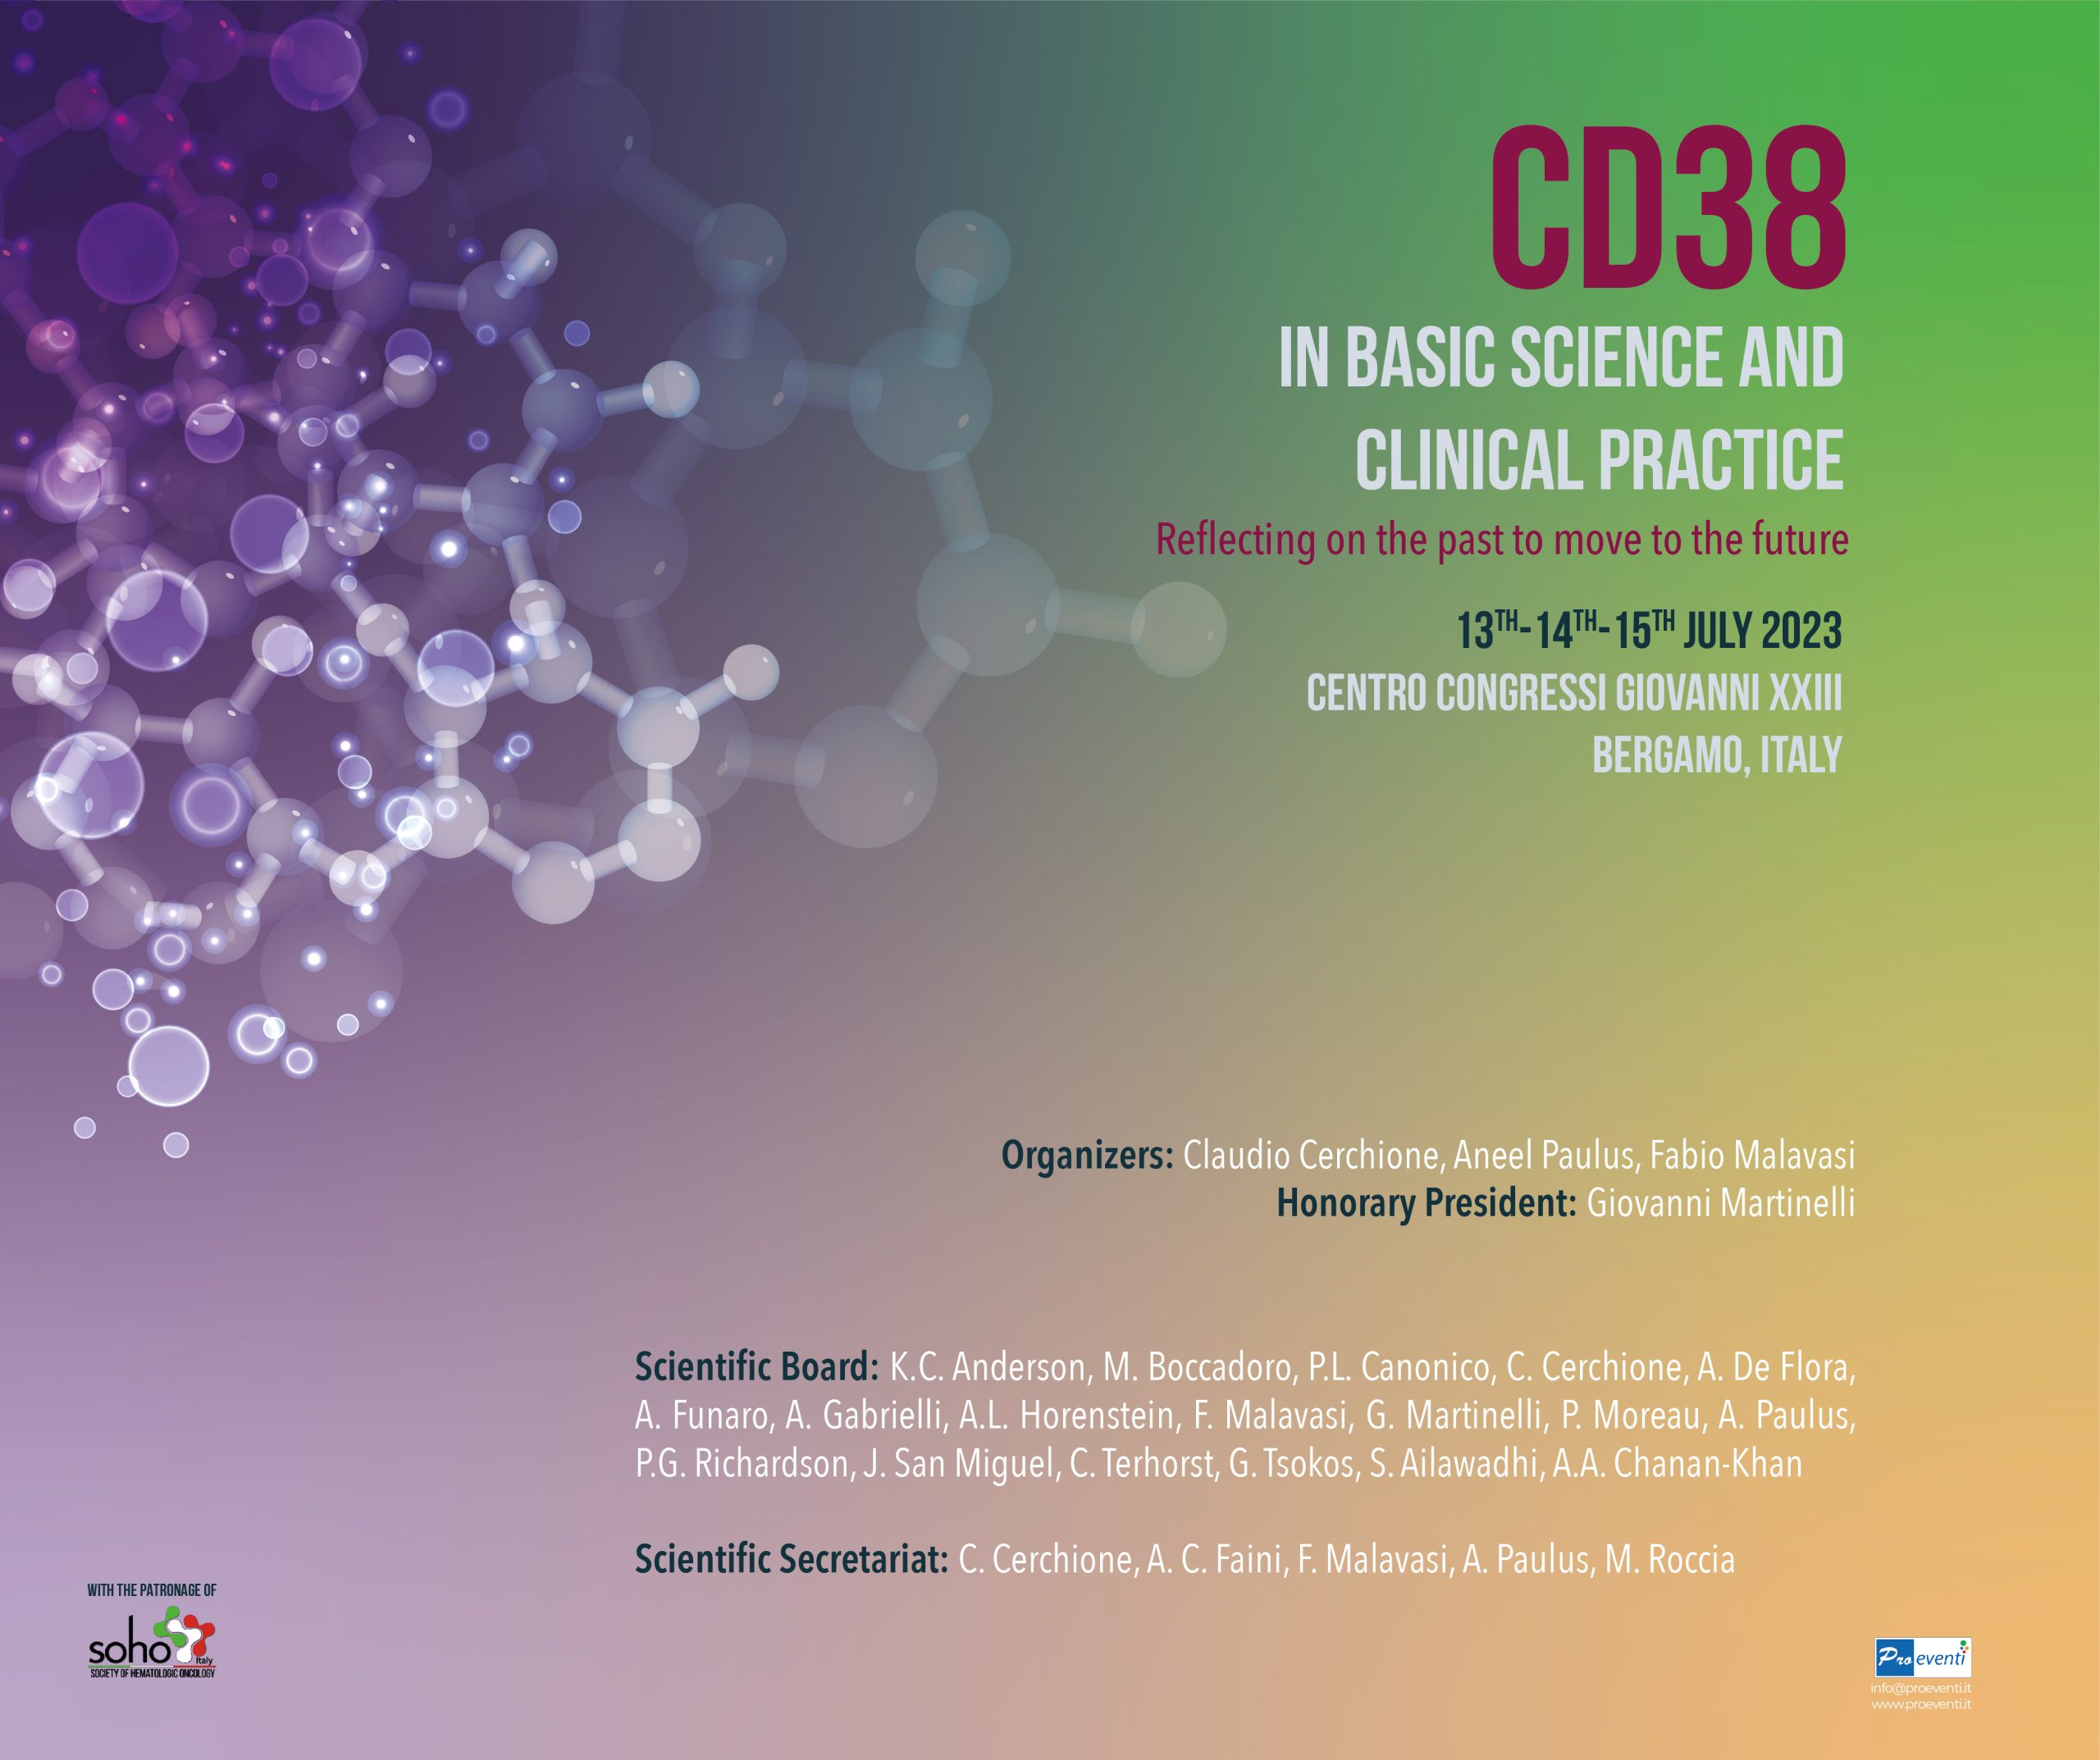 CD38 IN BASIC SCIENCE AND CLINICAL PRACTICE: REFLECTING ON THE PAST TO MOVE TO THE FUTURE